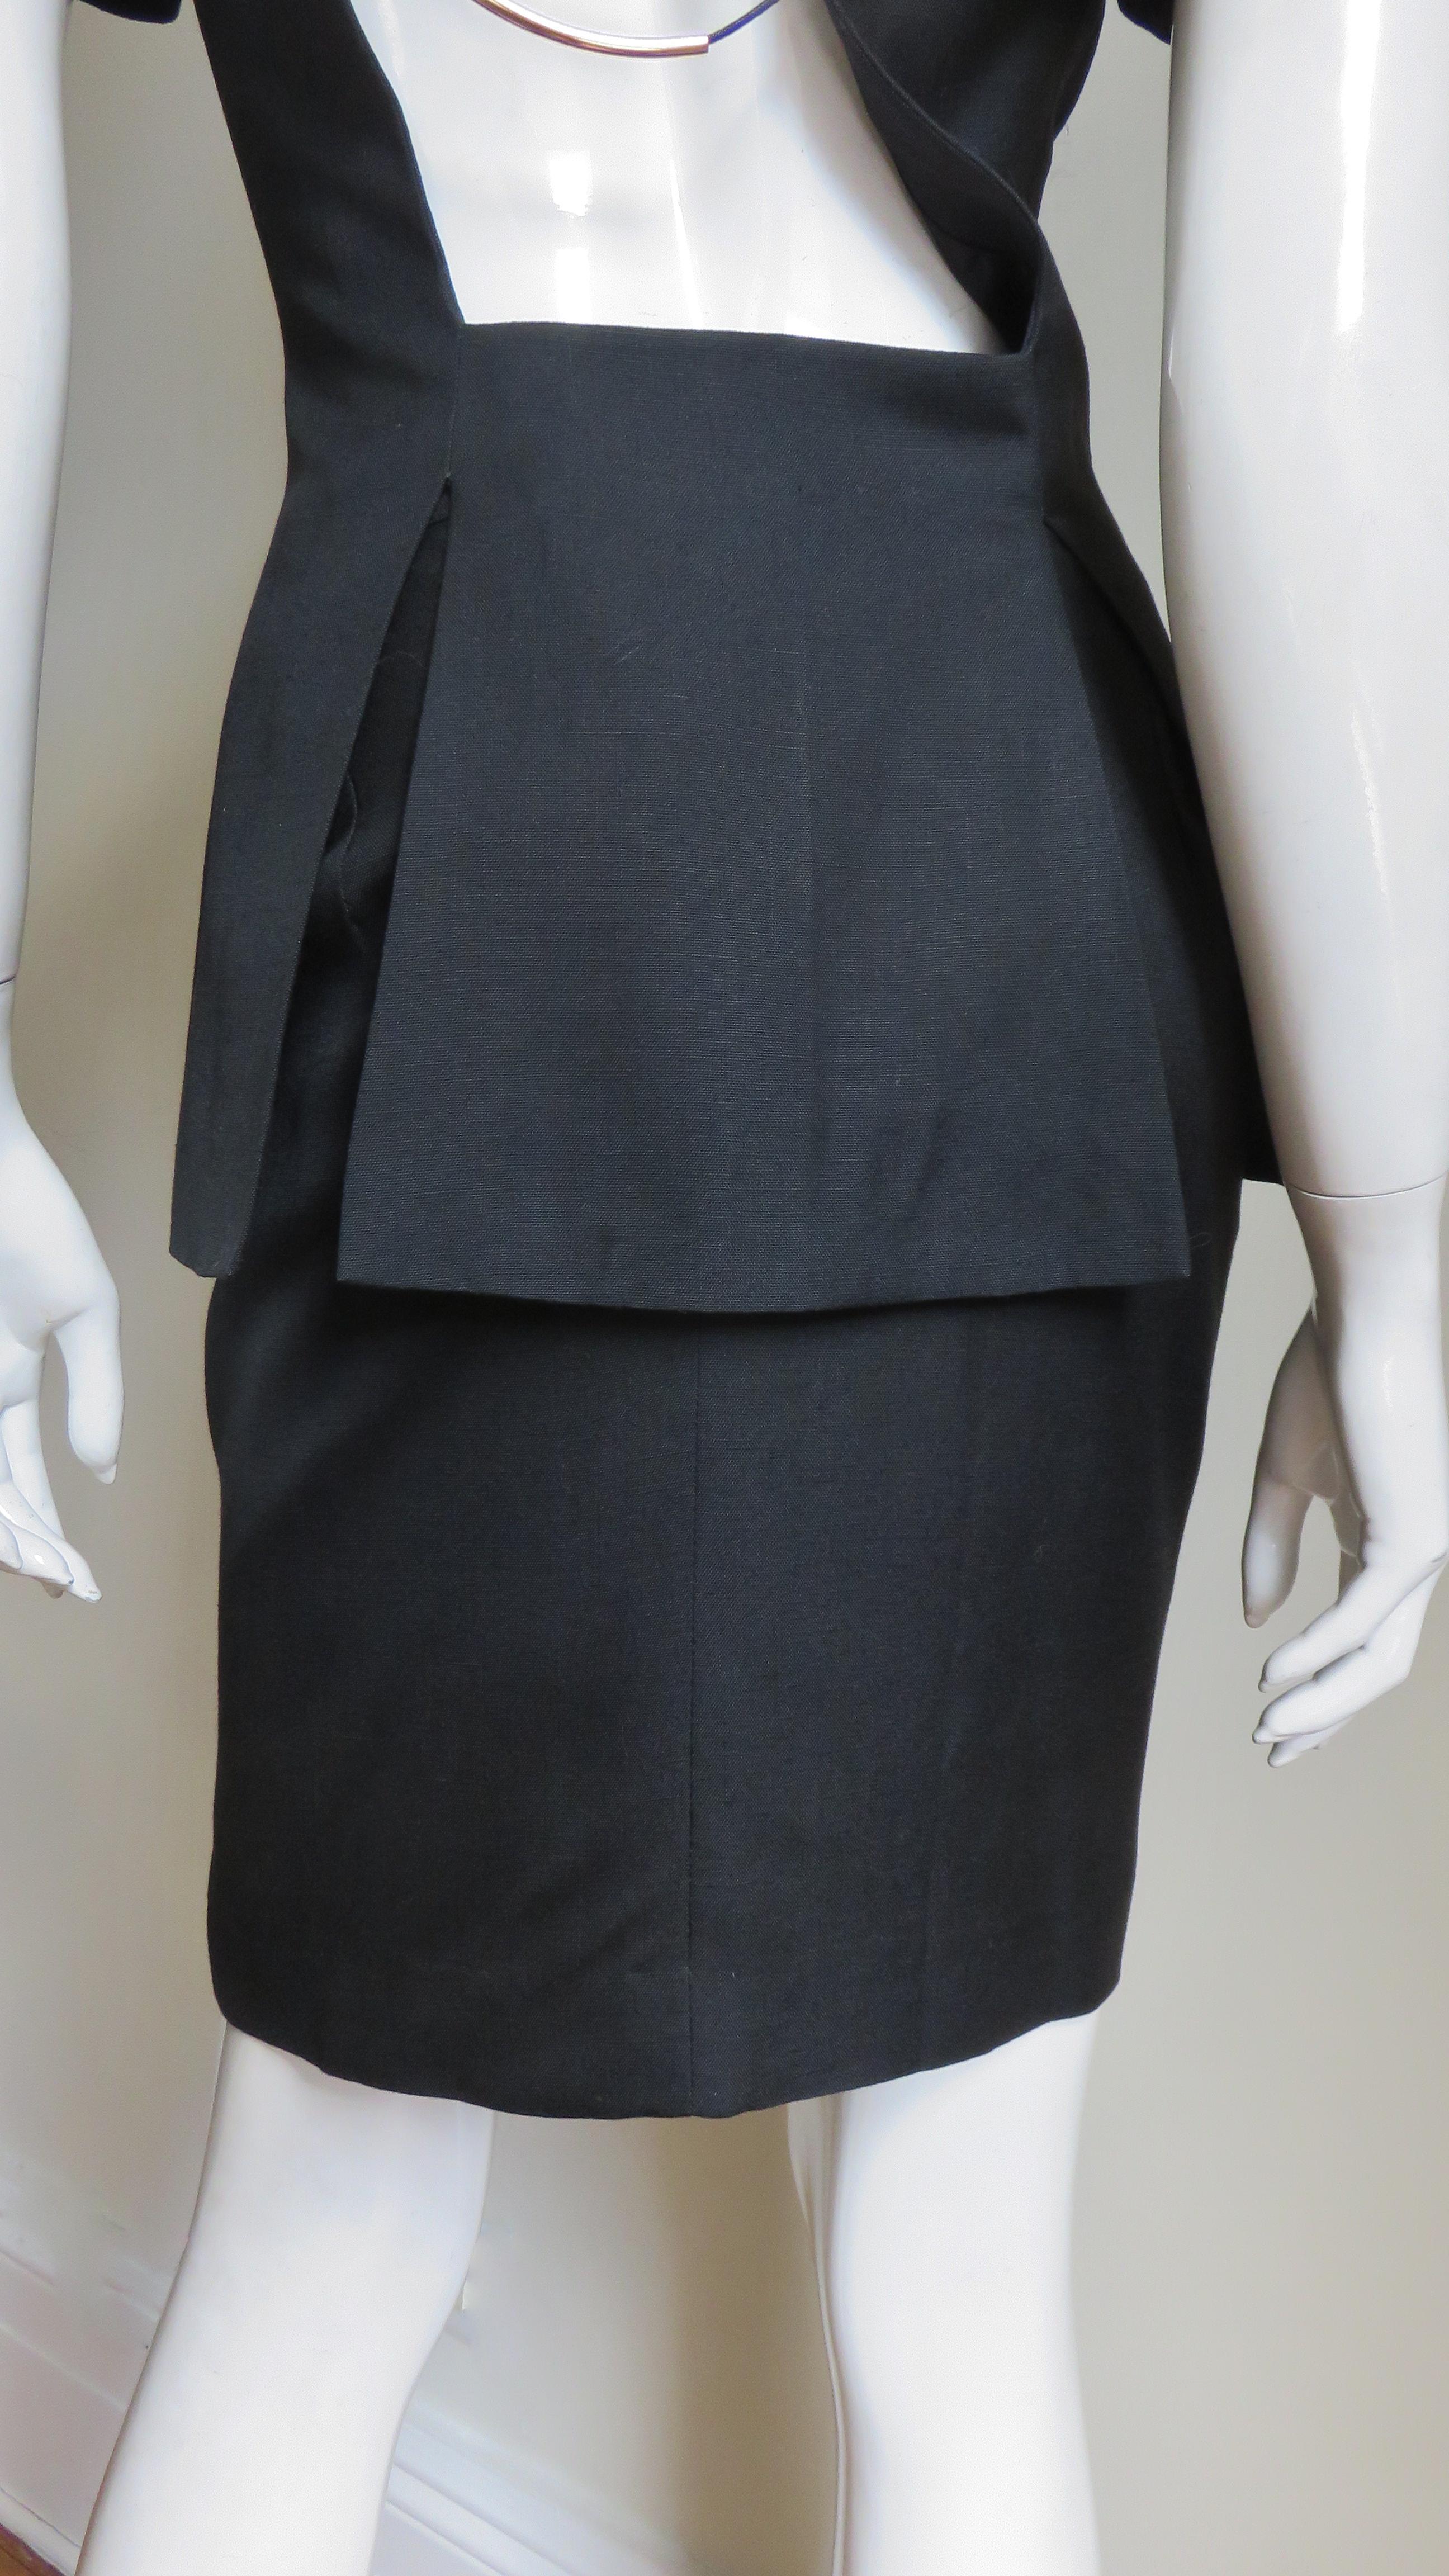 Gianfranco Ferre Skirt Suit with Cut out Jacket 7